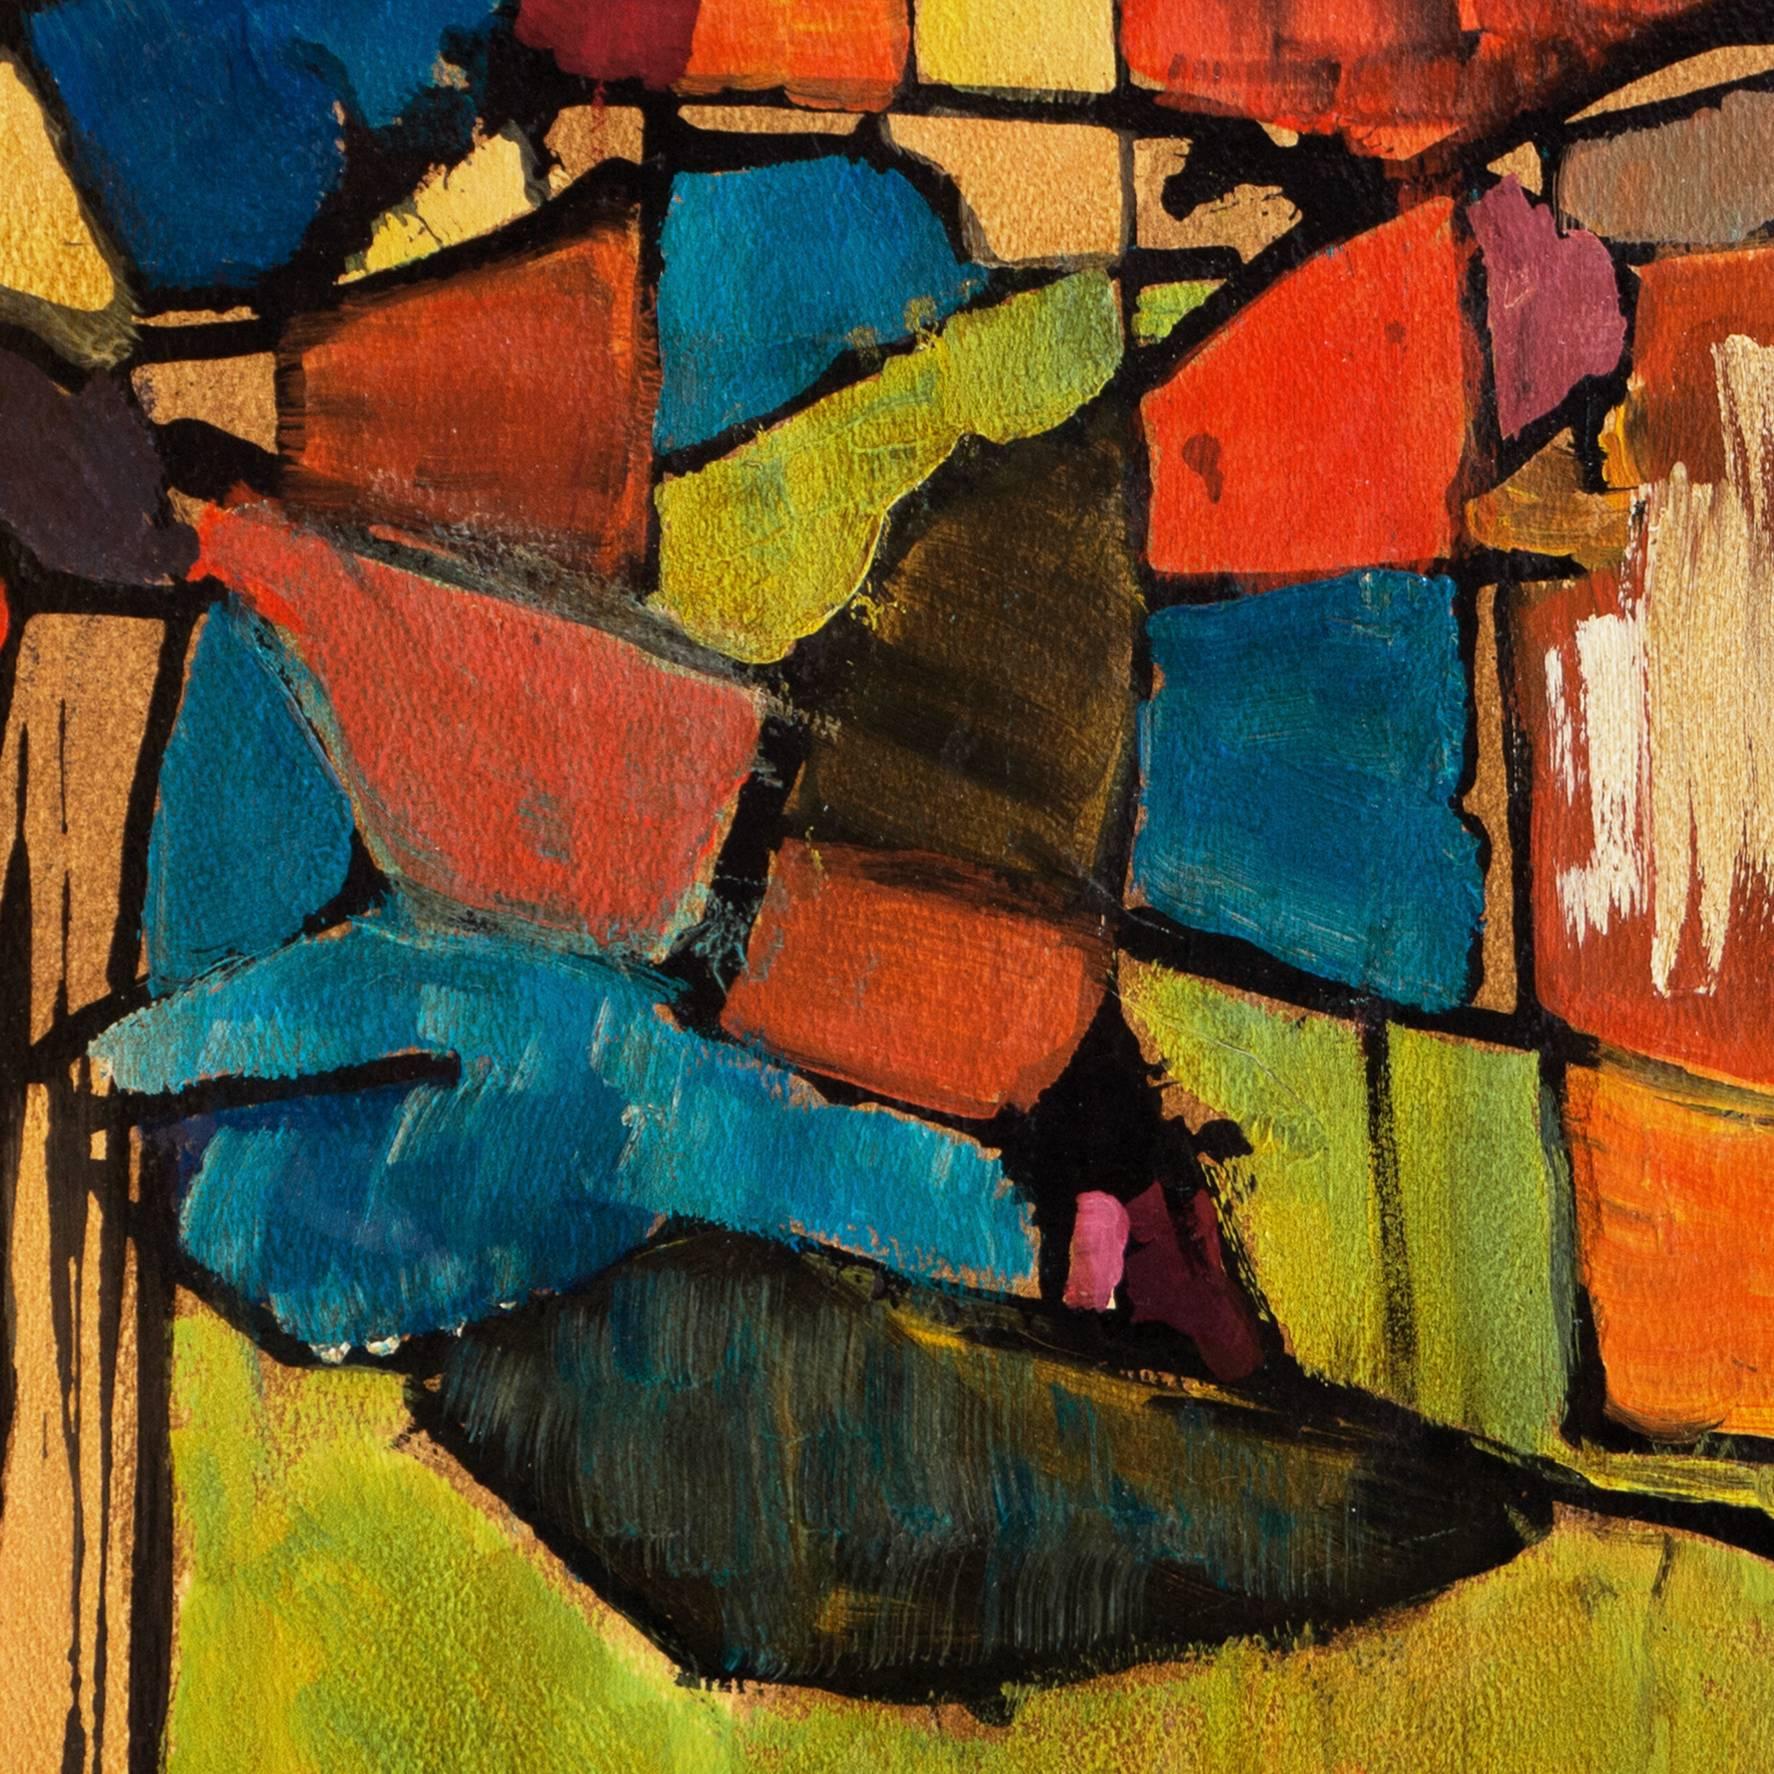 Oil abstract comprising interconnected organic shapes in variegated shades of turquoise, vermilion, coral, and lime, outlined in deep ebony.

Signed with monogram lower right, 'P.T.'. Additionally signed verso, 'Pearl Took' and dated November